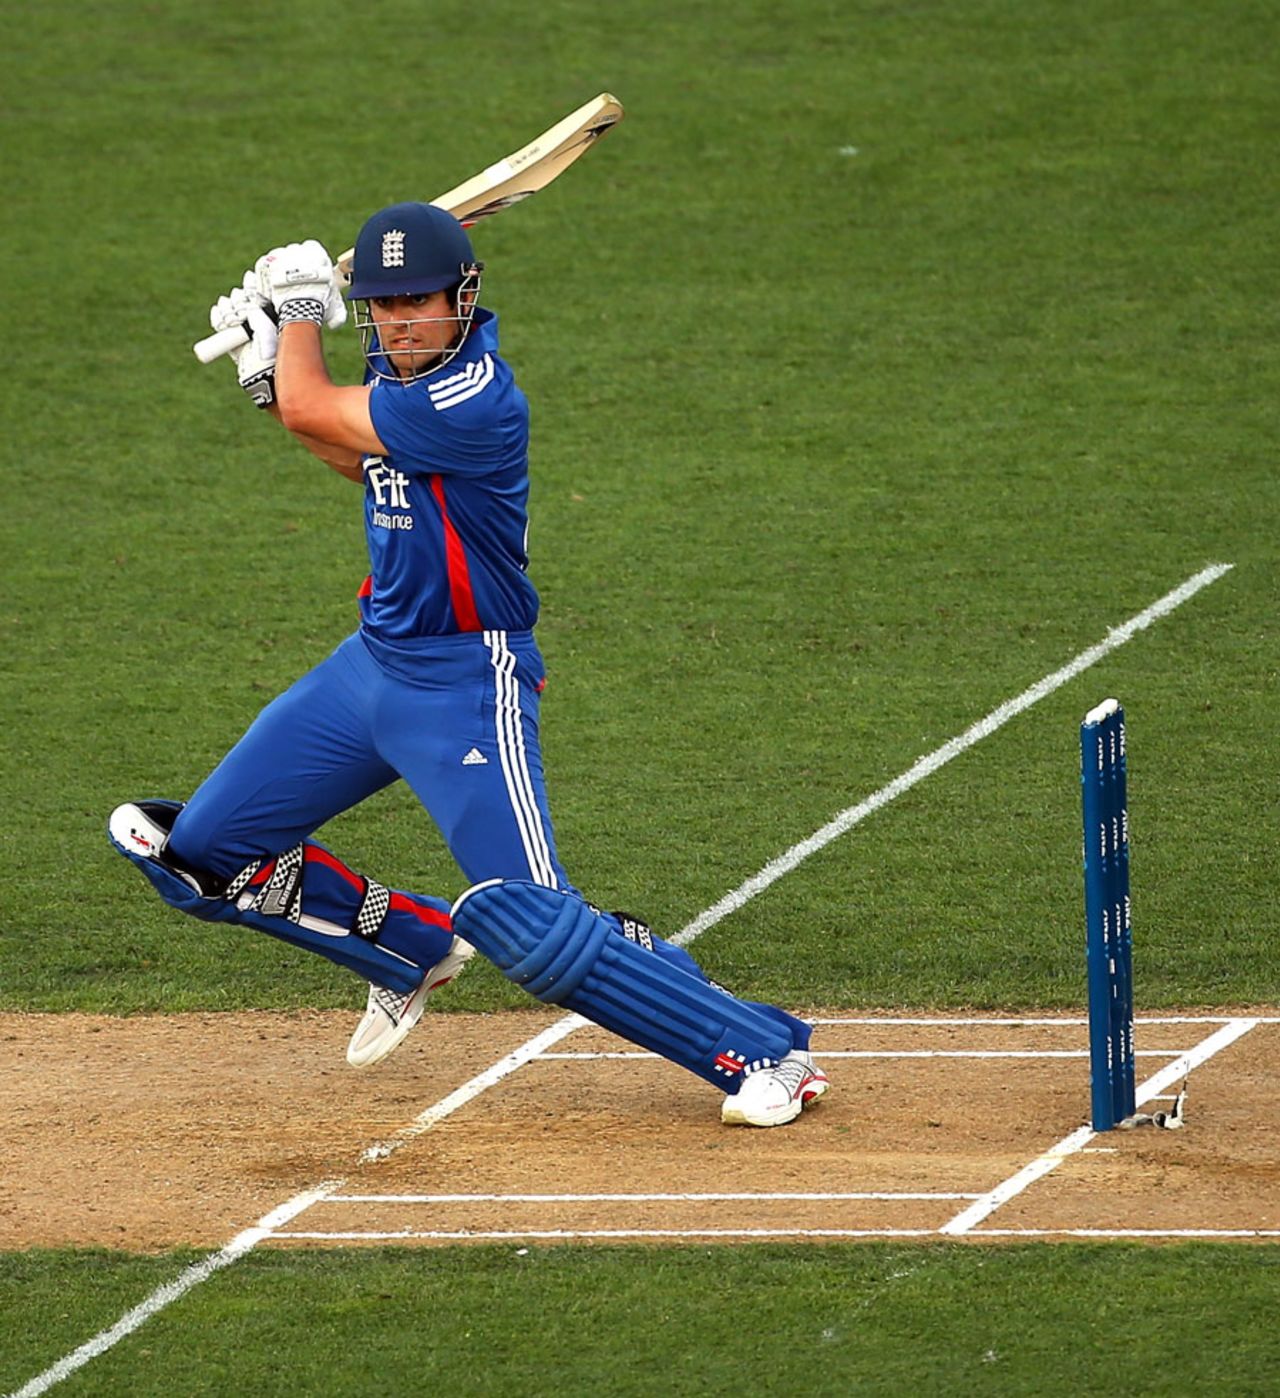 England captain Alastair Cook cuts during his innings of 46, New Zealand v England, 3rd ODI, Auckland, February 23, 2013